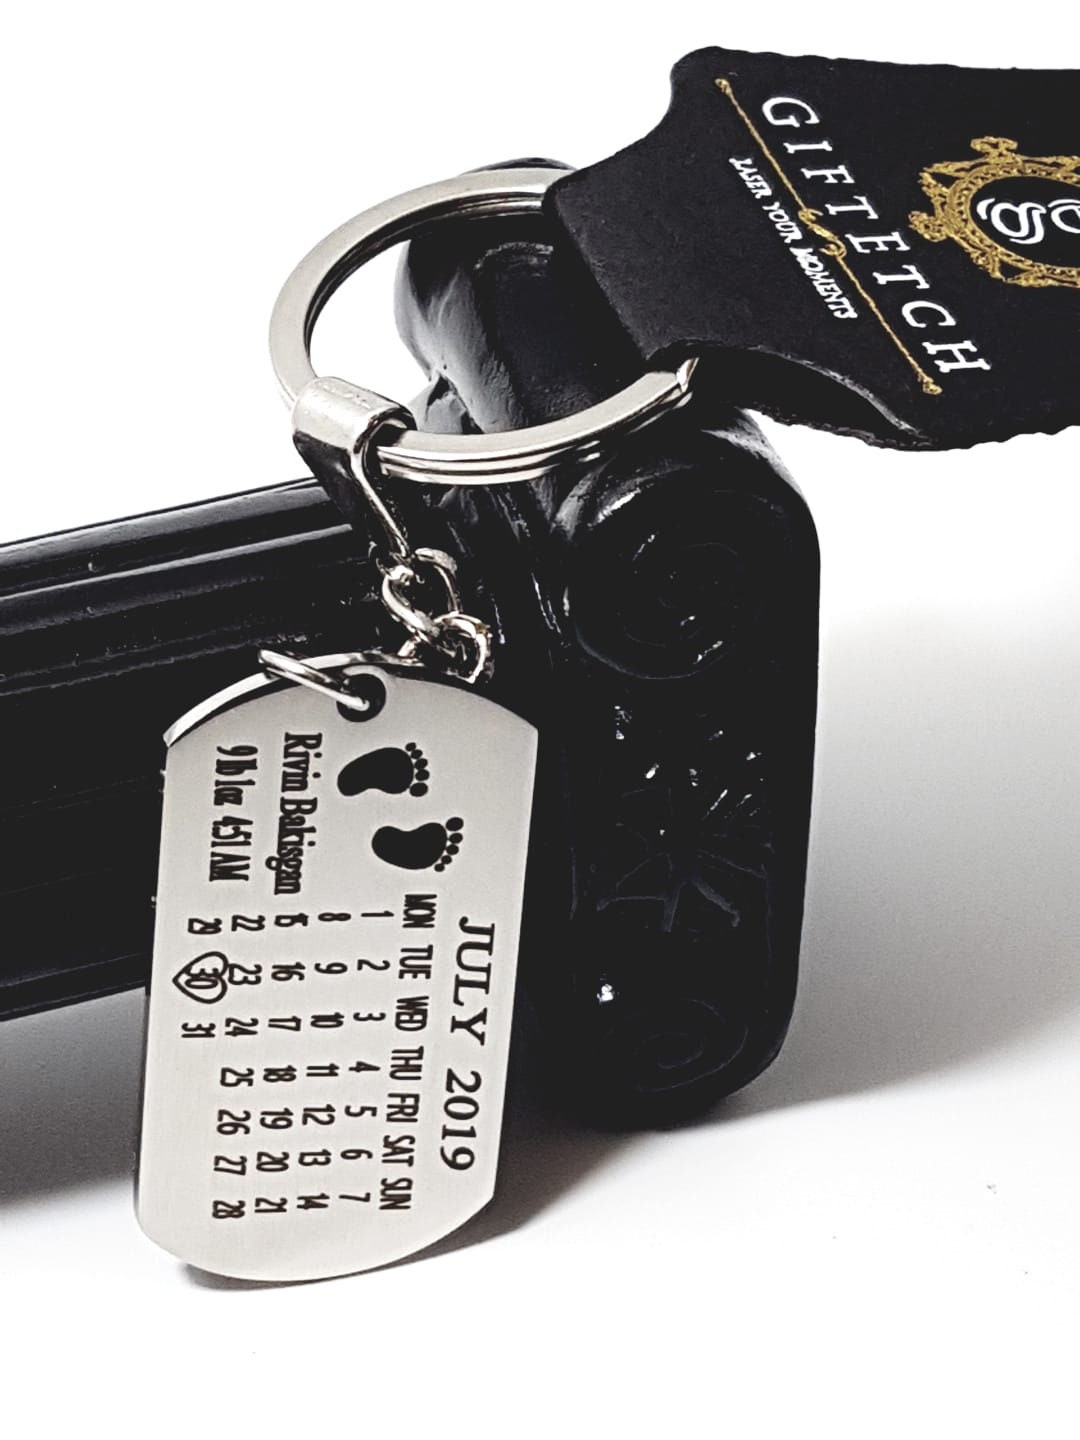 Personalised an Unforgettable Day, Date of Birth/Weight, Time Calendar Keyring